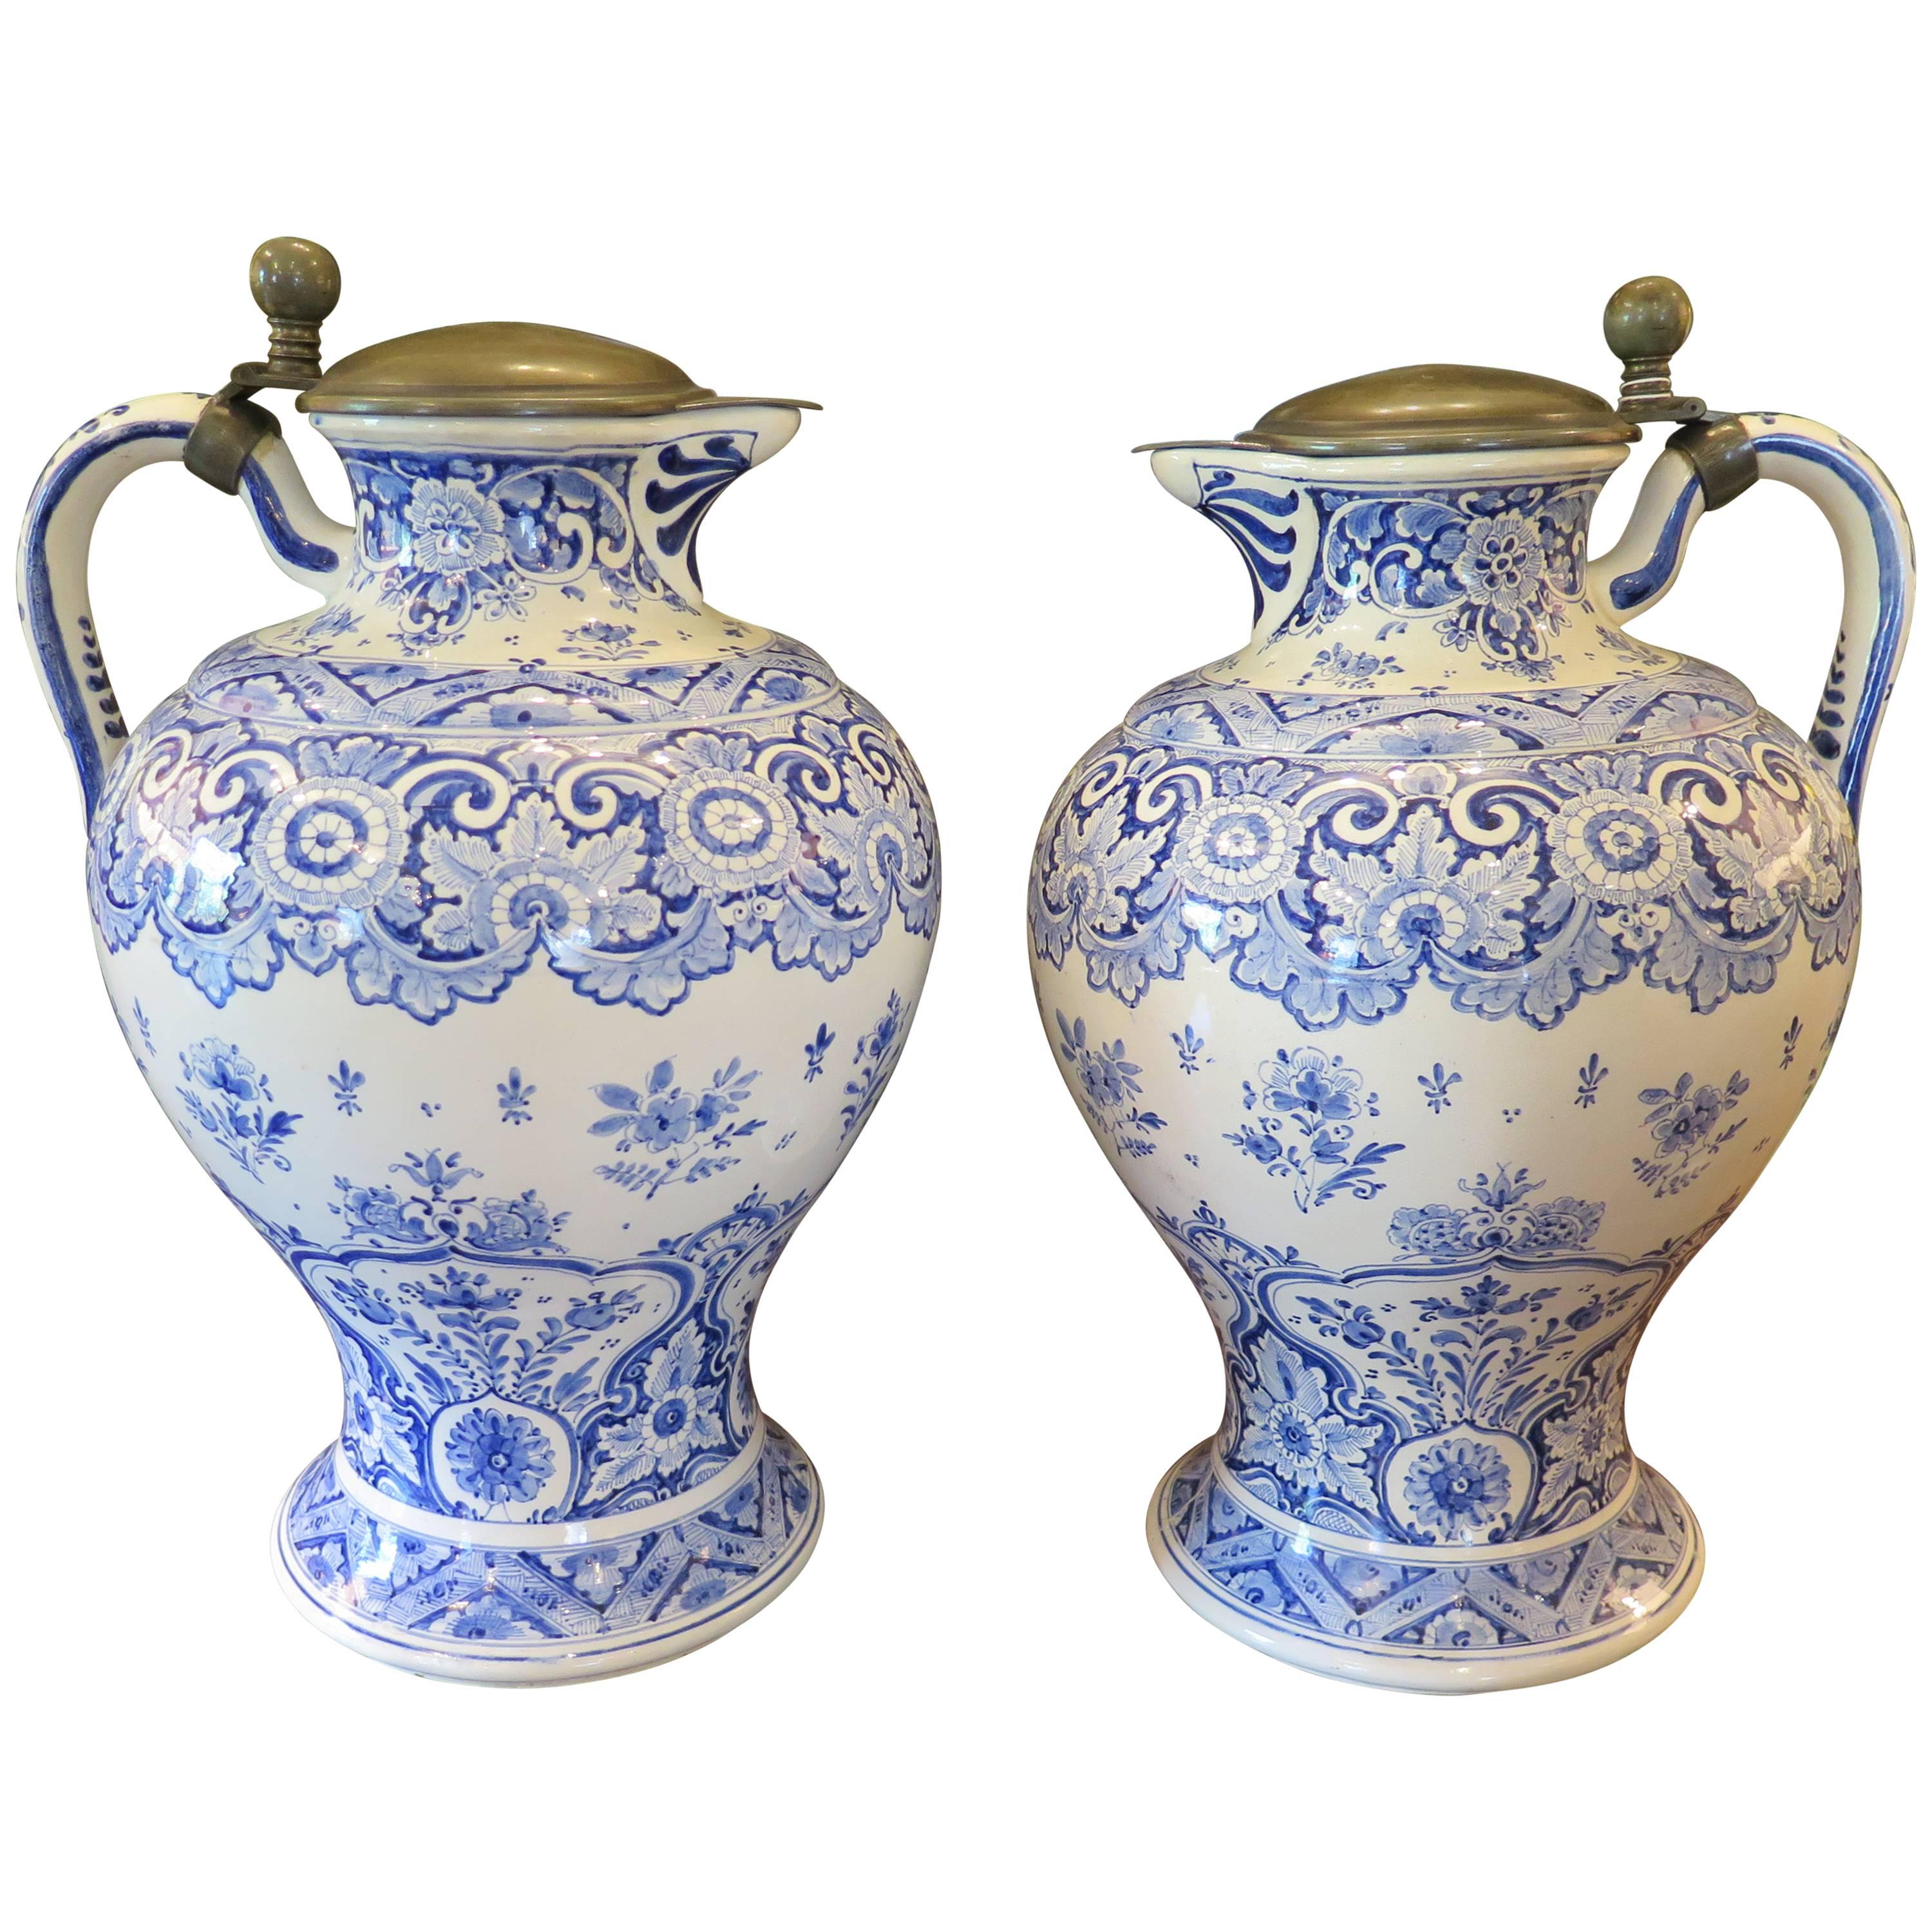 Pair of Very Large 19th Century Delft Pitchers Blue and White